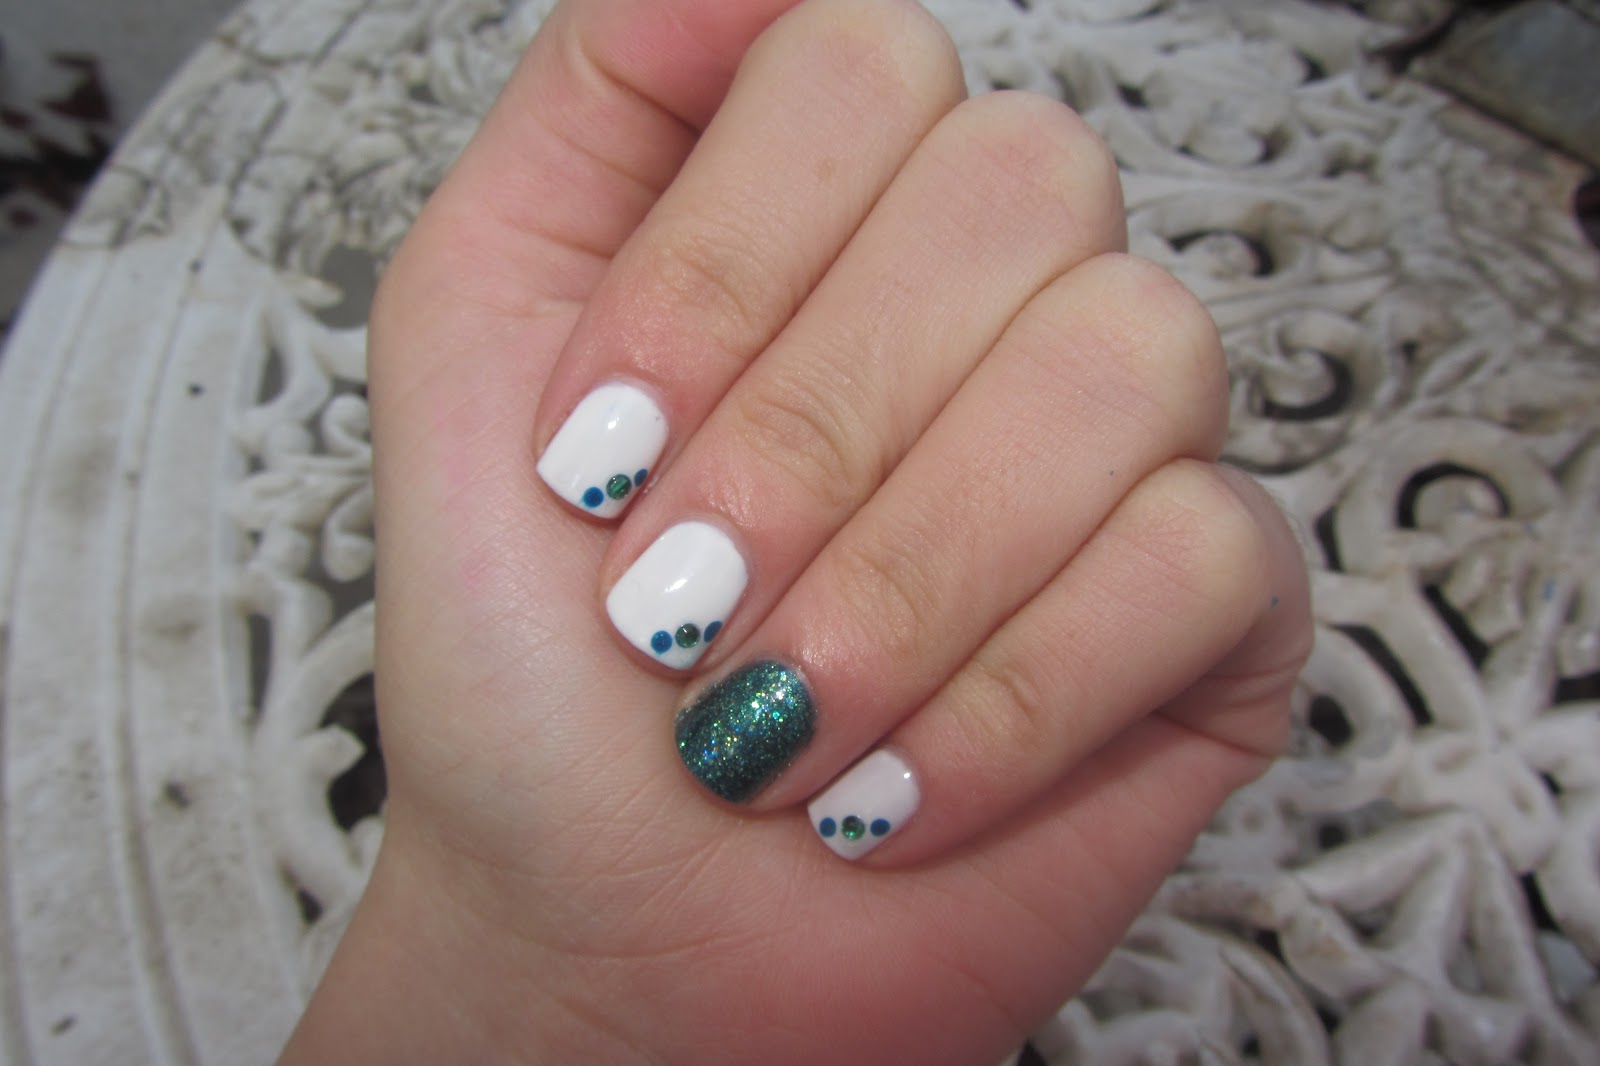 Sunflowers and Shimmer: White & Teal Nail Art (Polka Dots & Rhinestones)